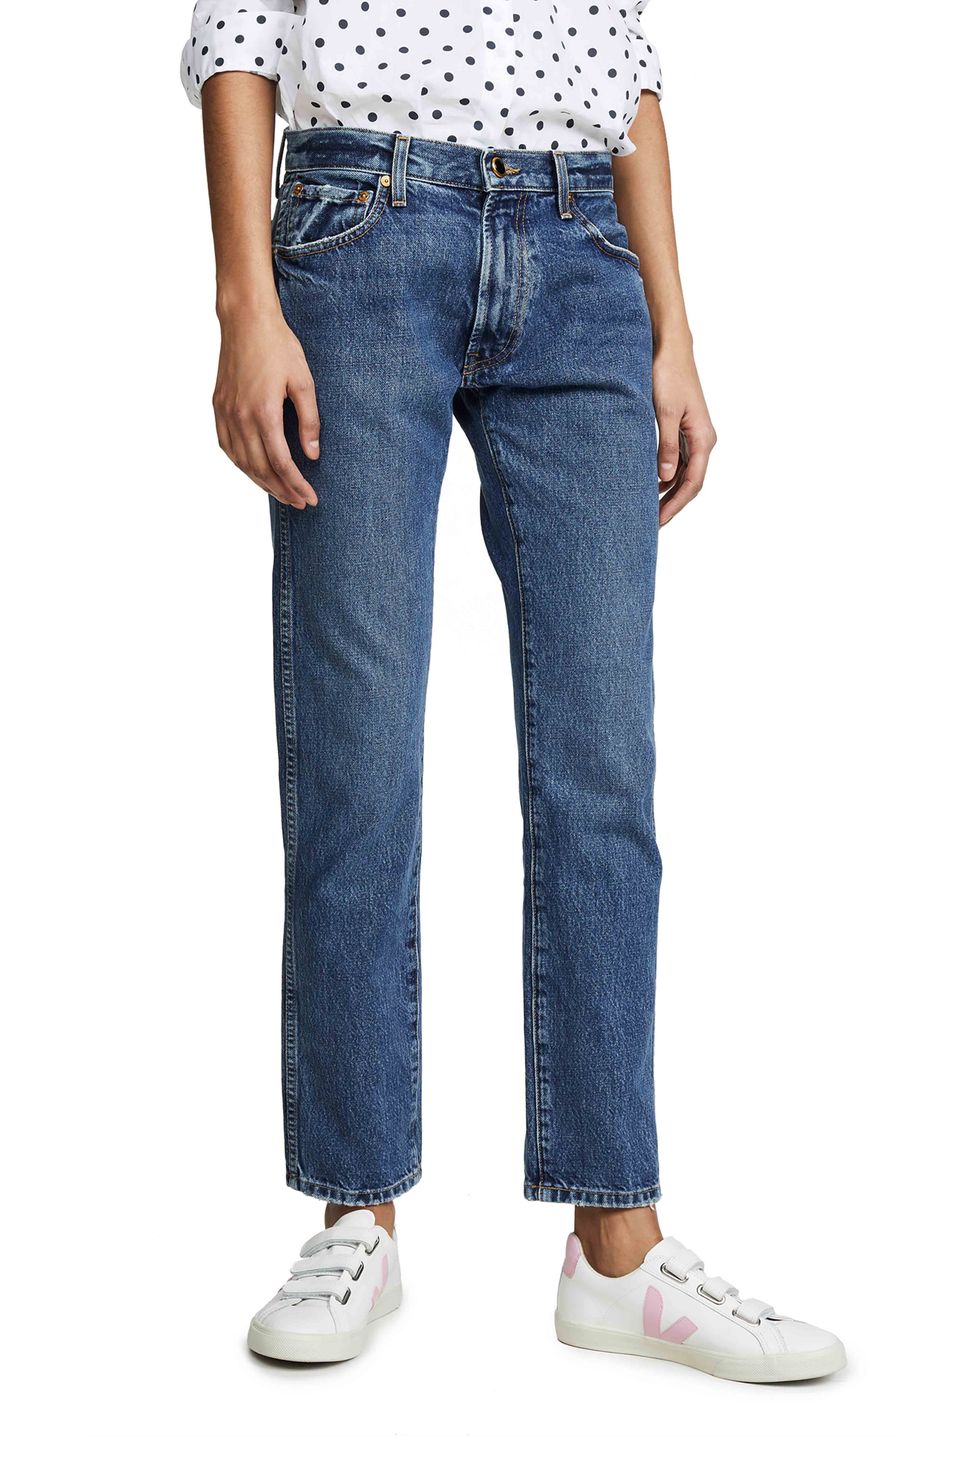 Best Low Rise Jeans to Shop - 12 Pairs of Low Rise Denim For Every Body ...